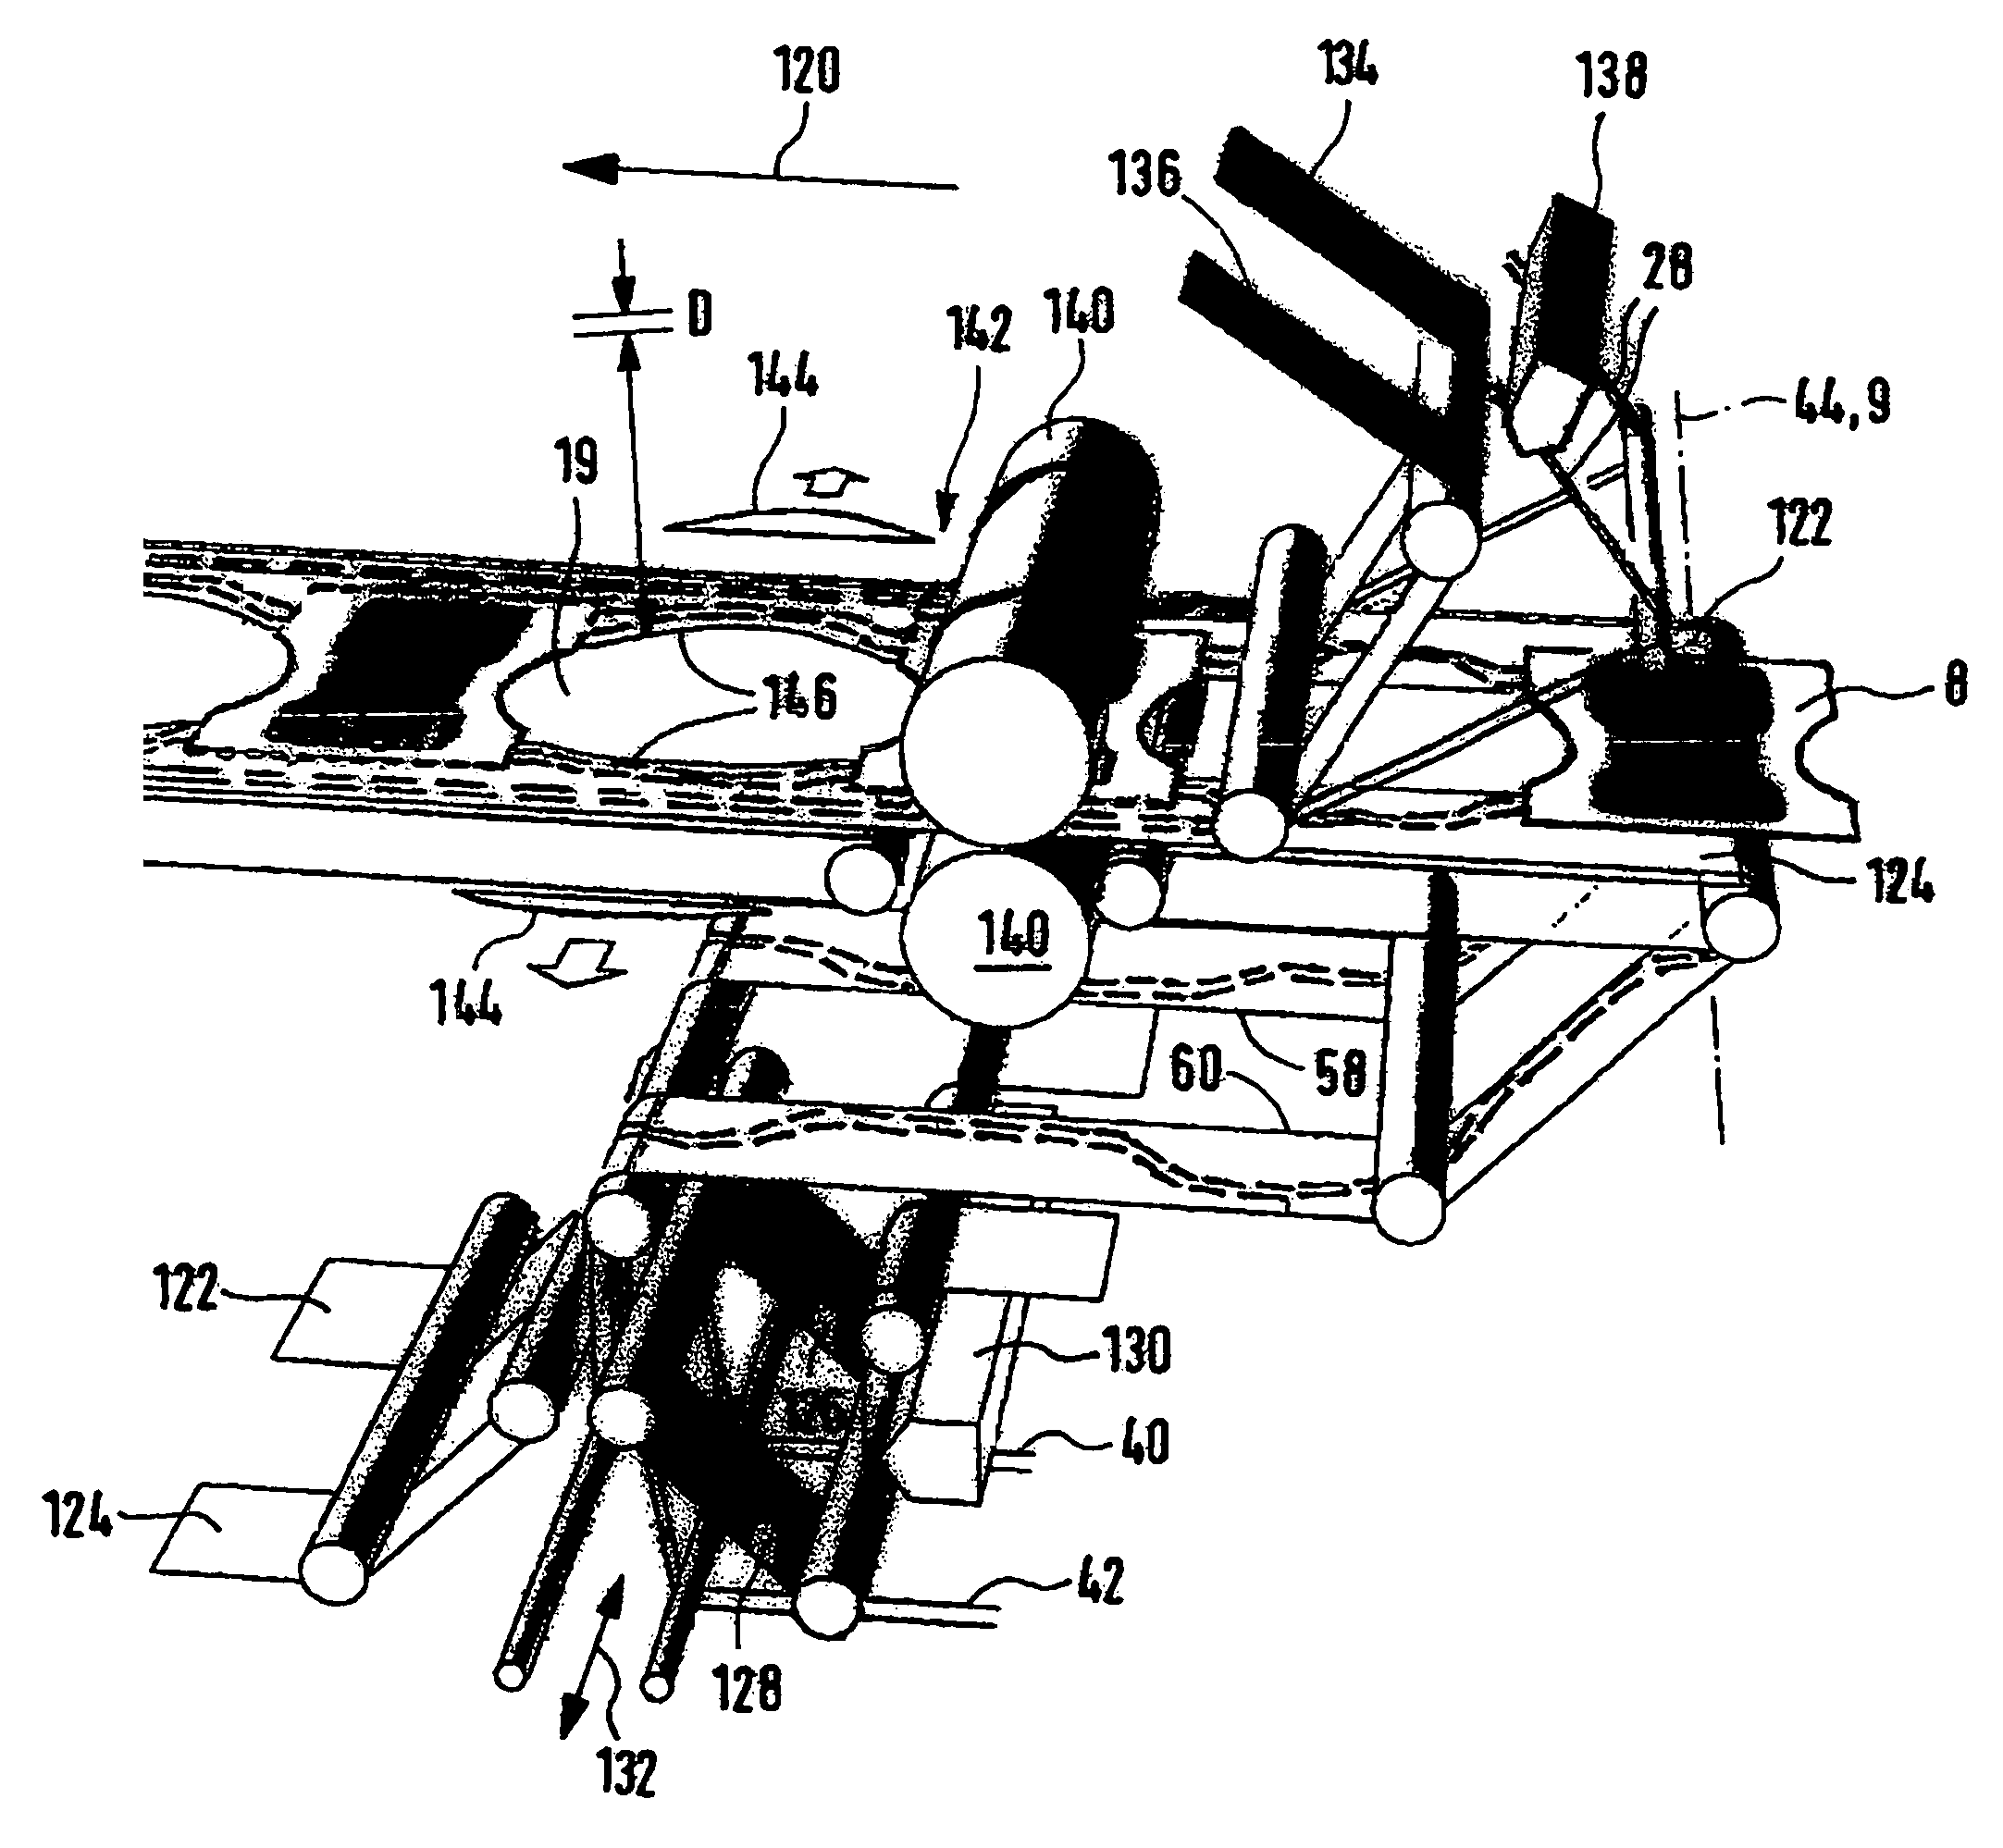 Method of producing incontinence articles in the form of pants